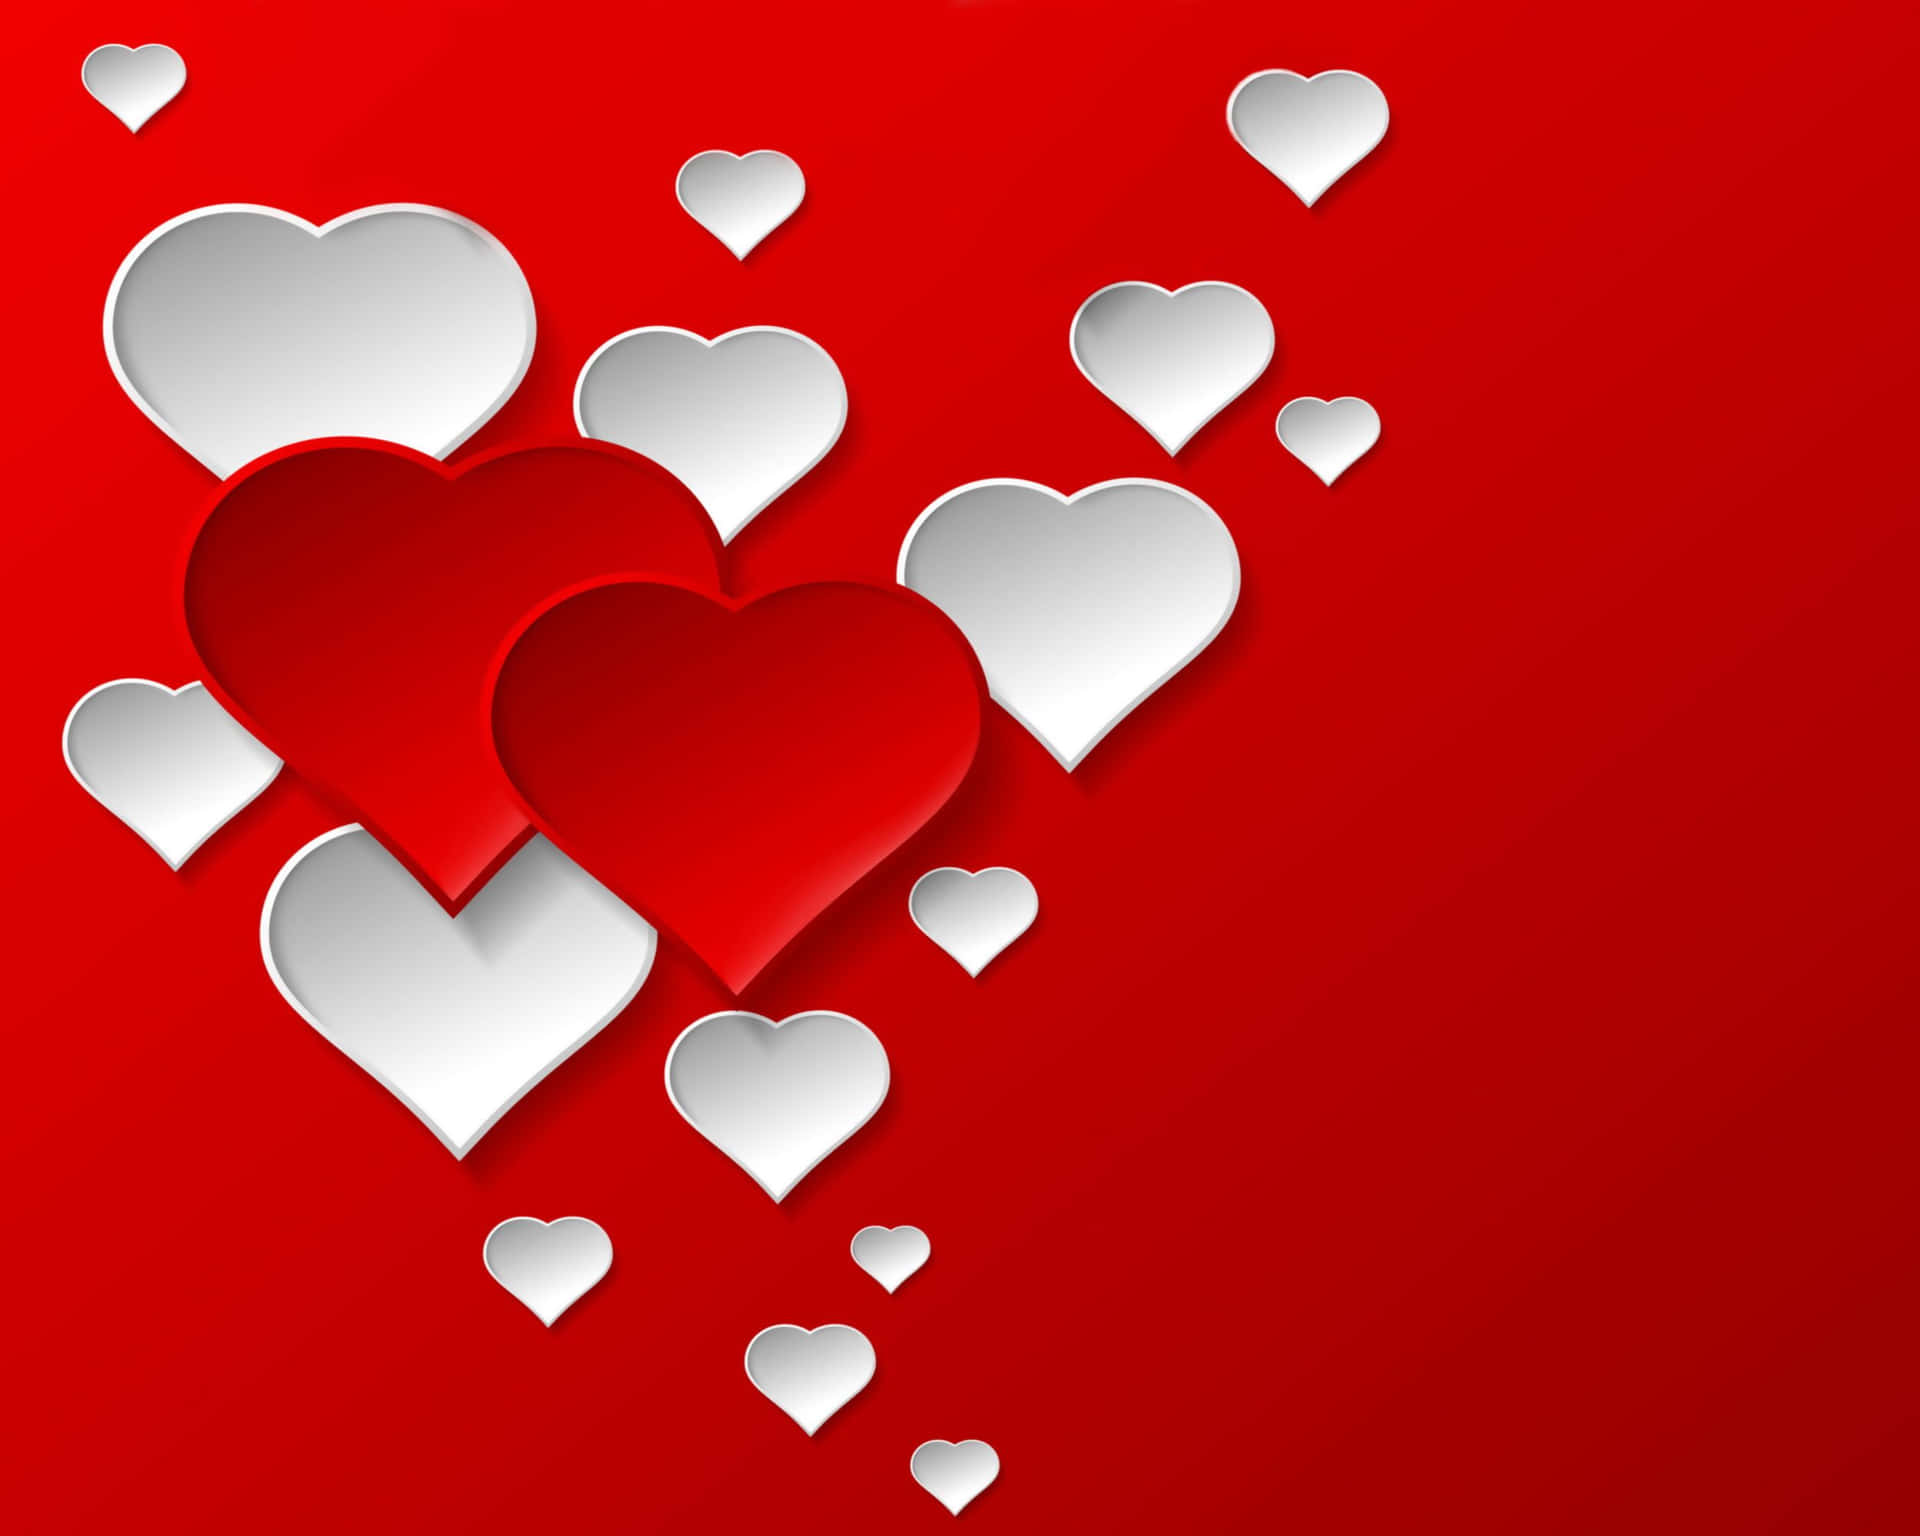 Show your love with this beautiful Love Heart background